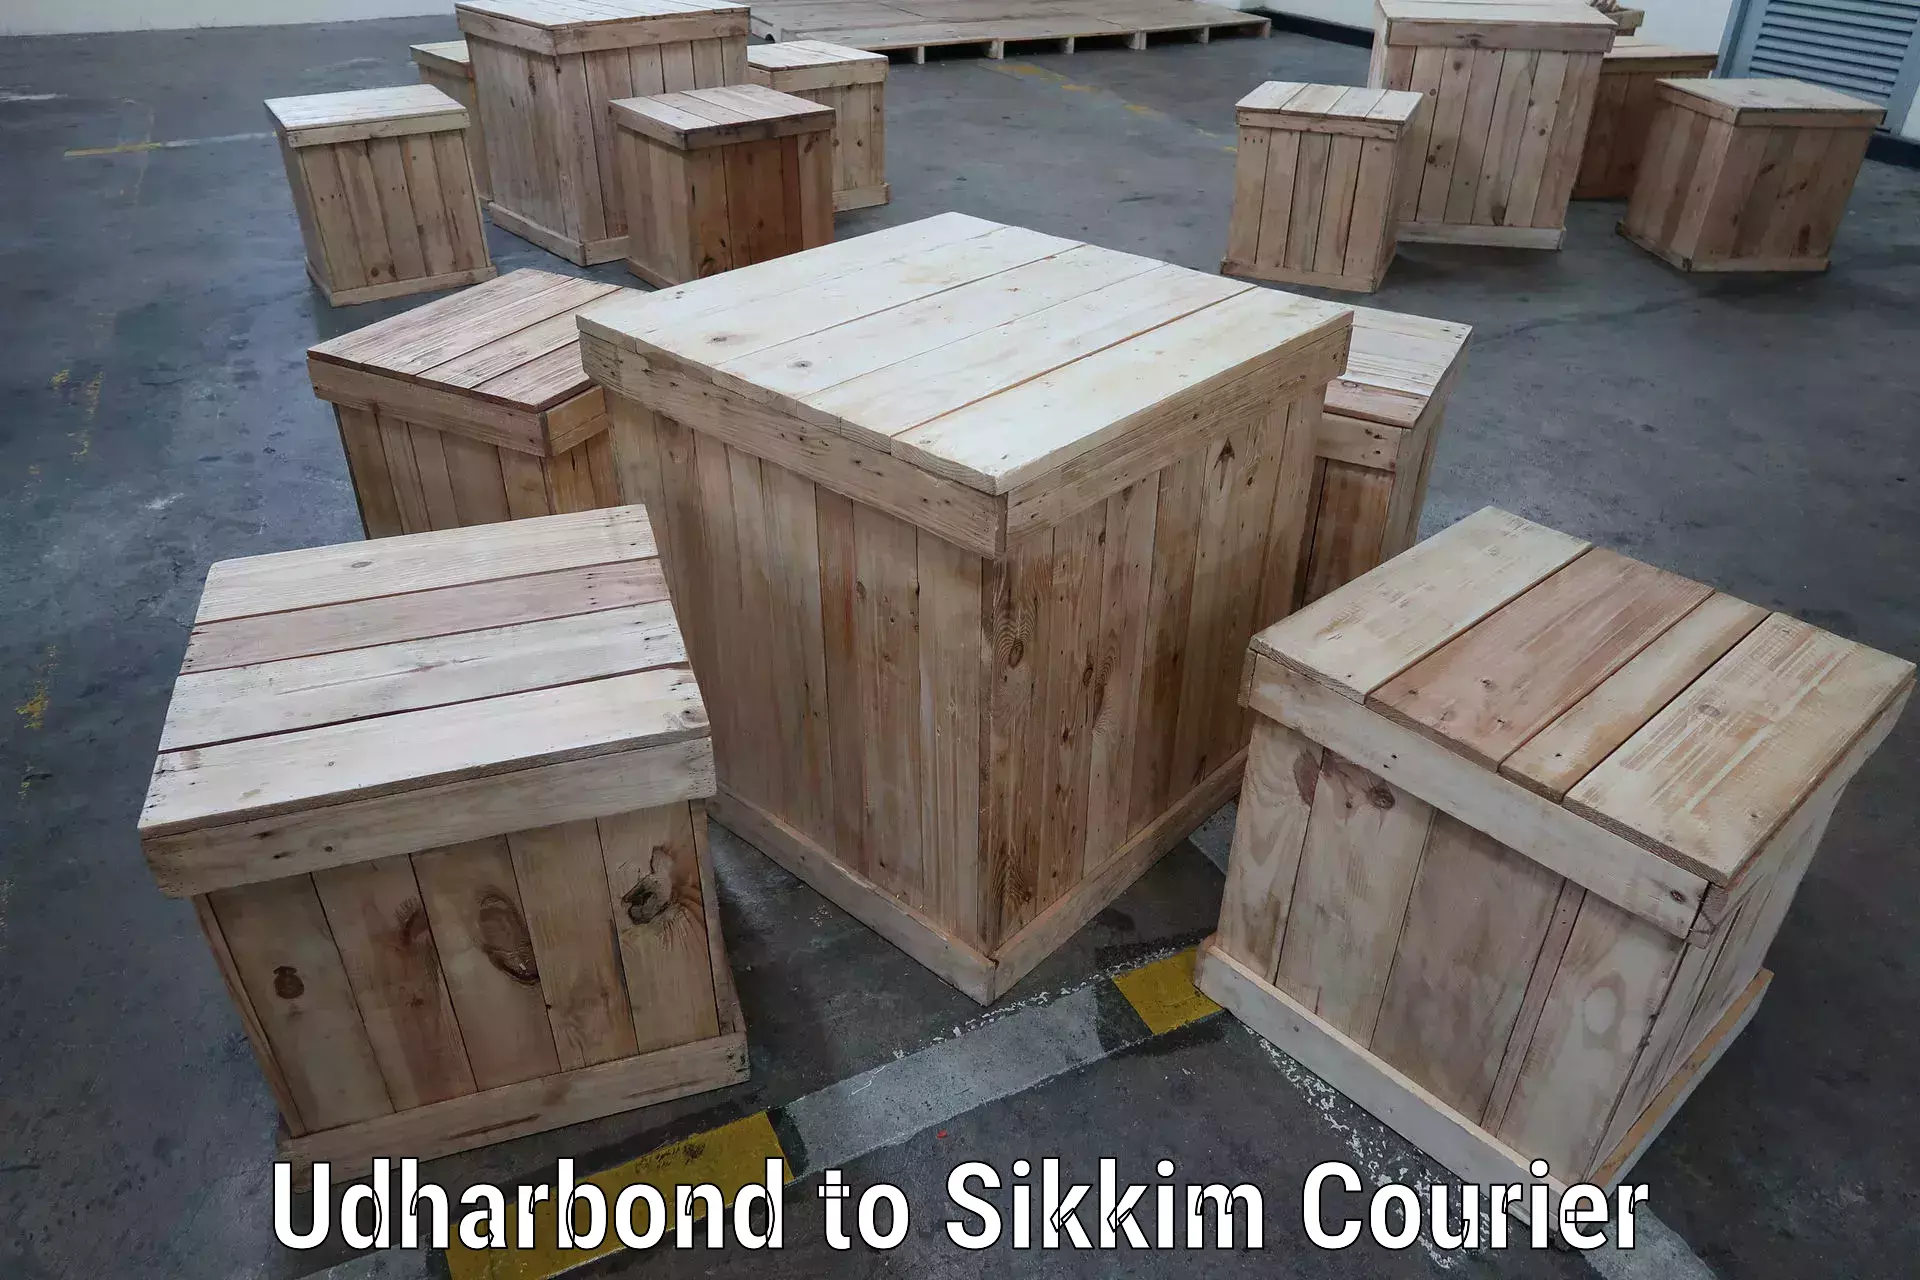 Efficient order fulfillment Udharbond to South Sikkim